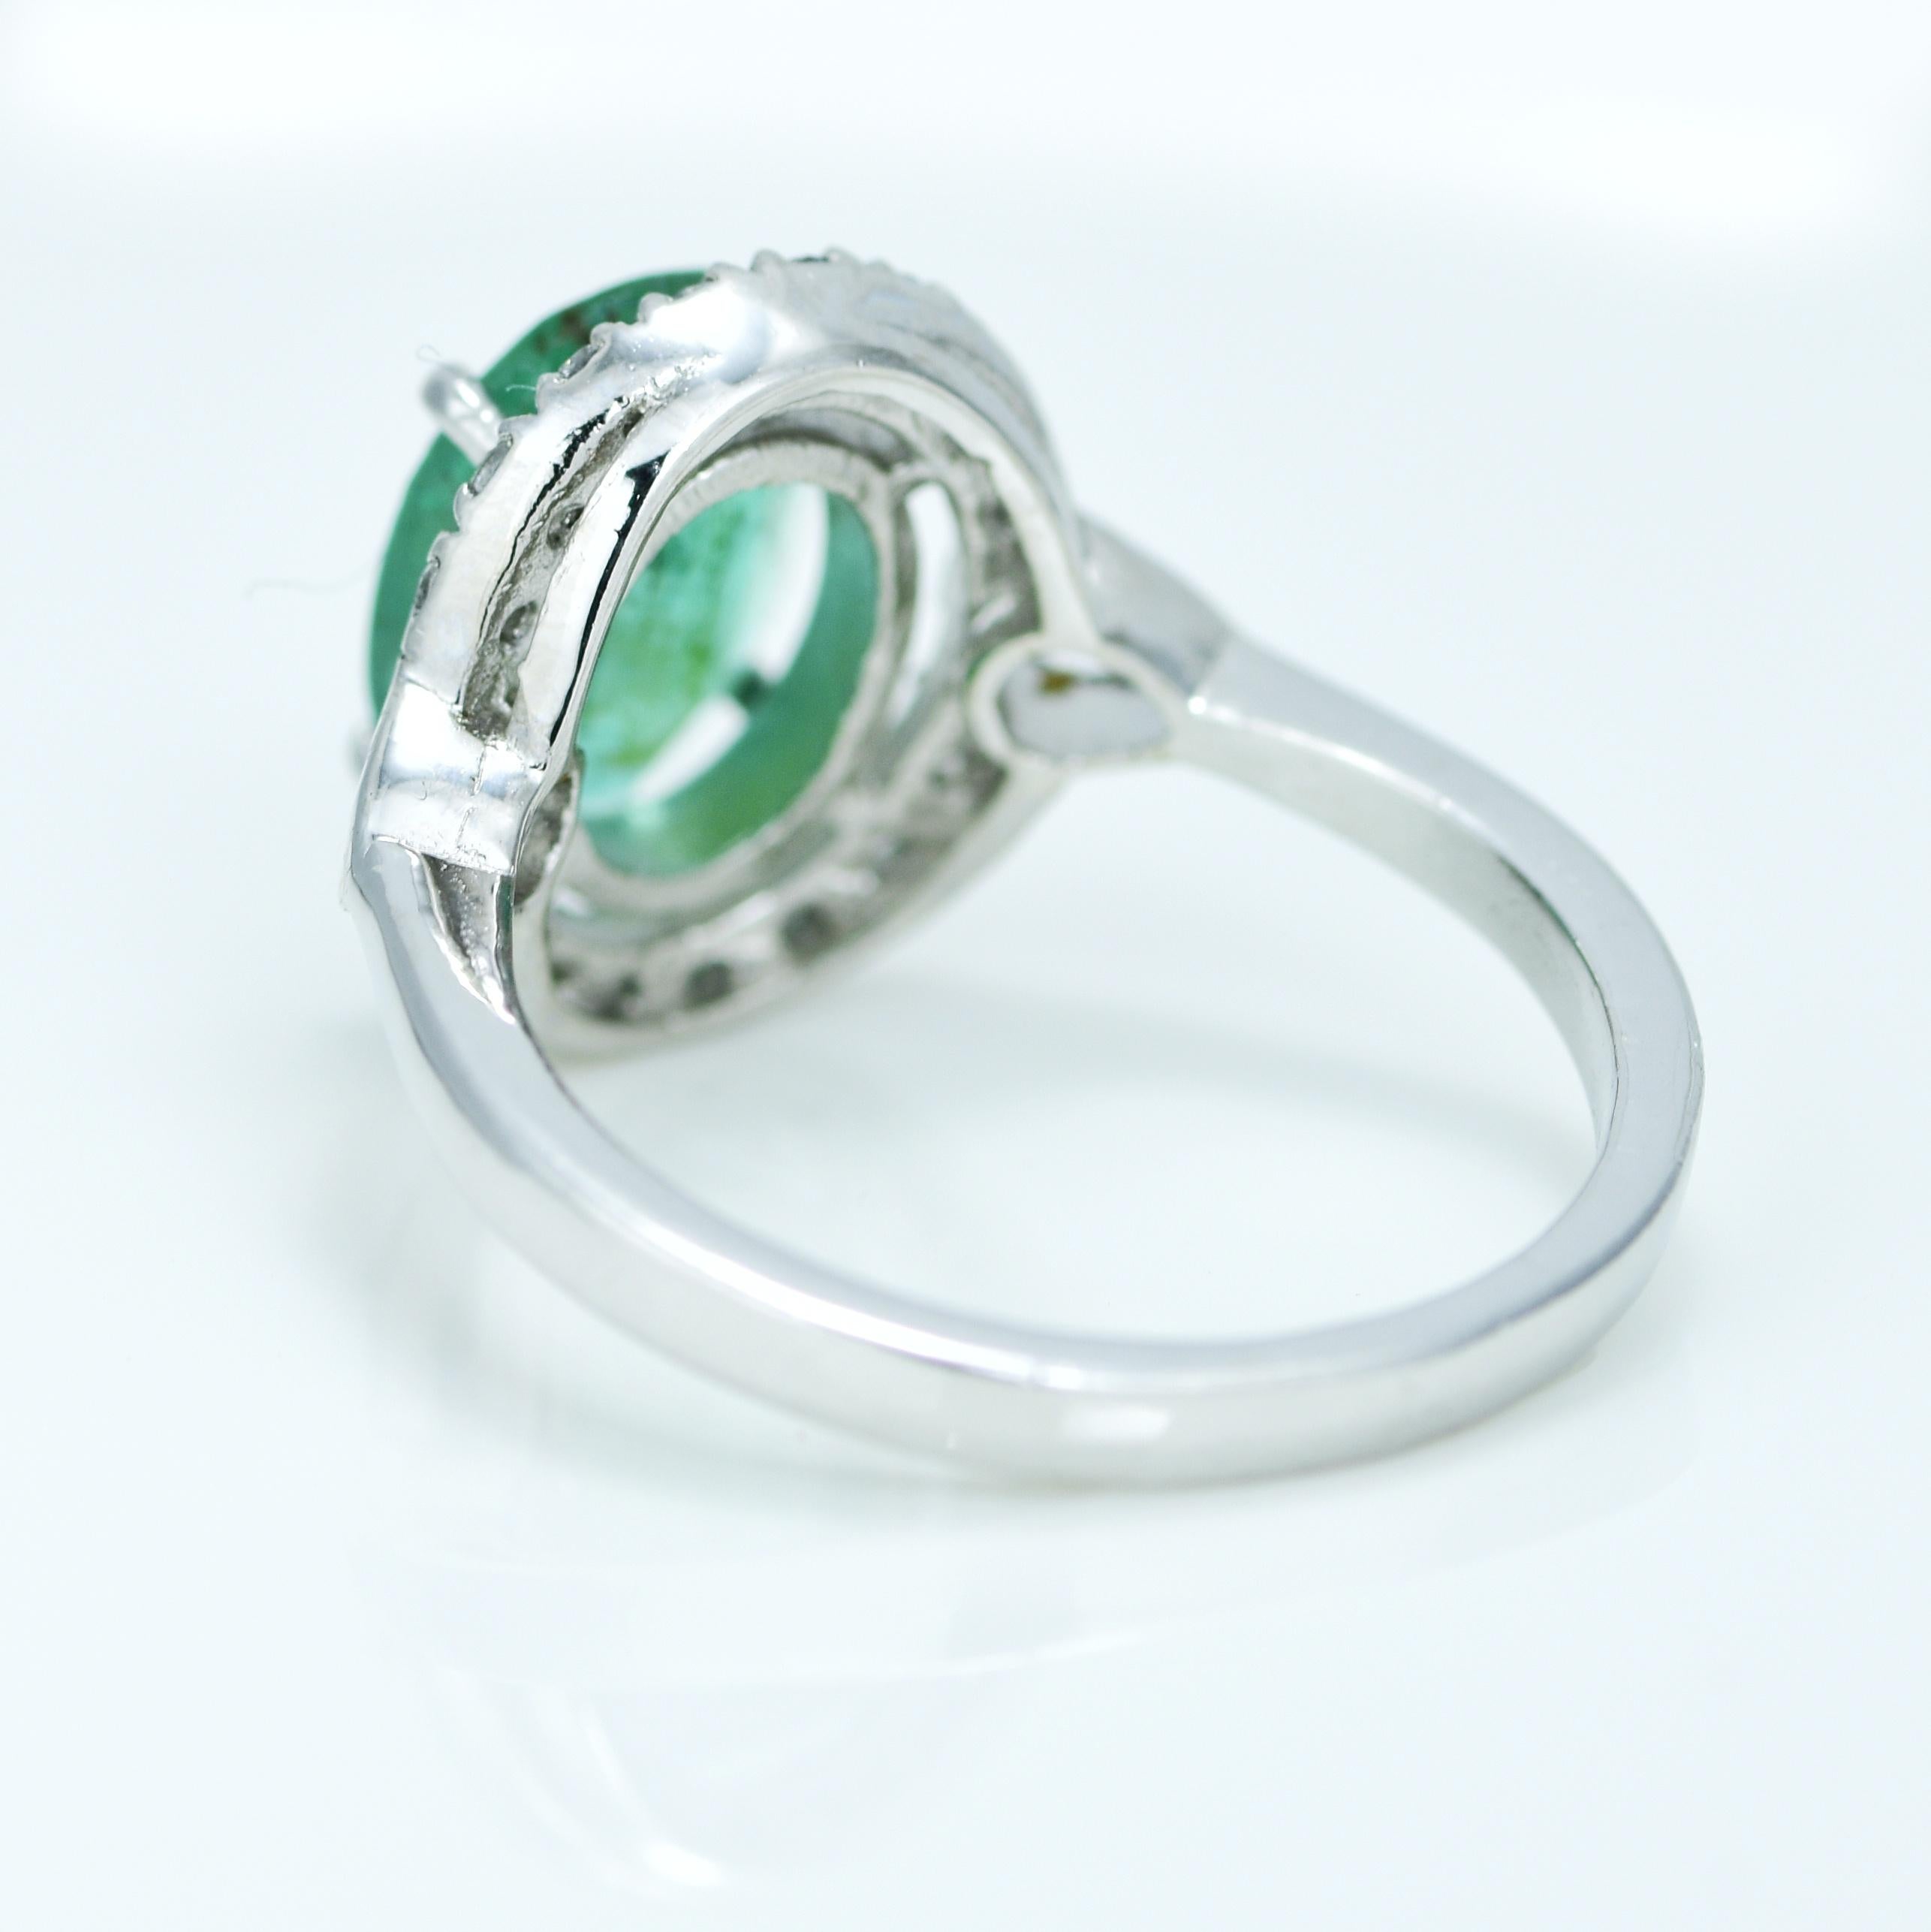 Oval Cut Natural 3.75 Carat Emerald Halo Ring